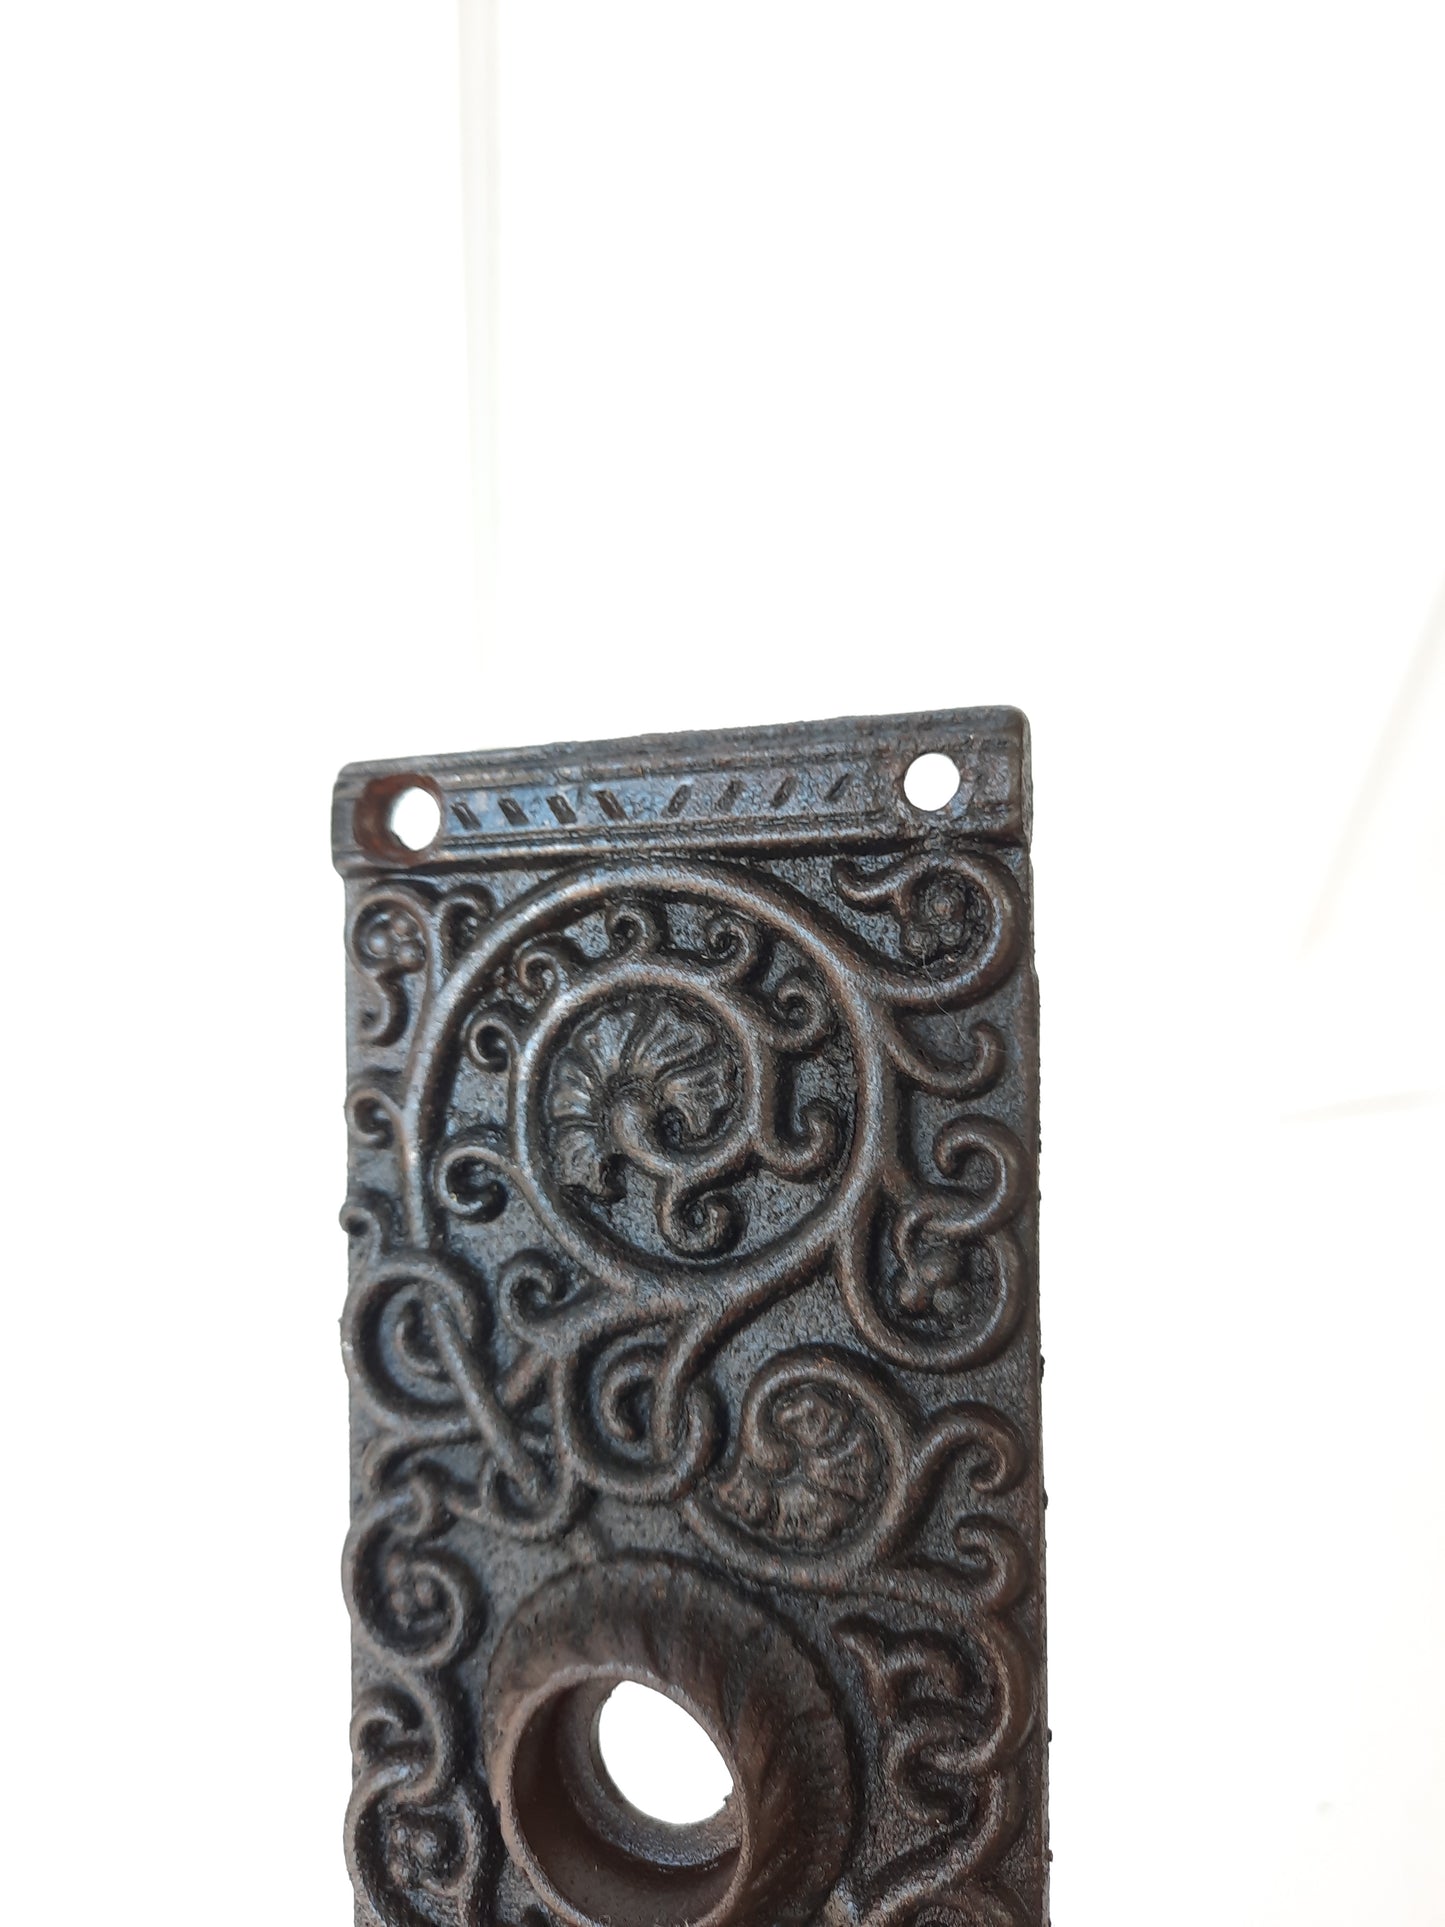 Large Antique Iron Entry Backplate, Ornate Double Keyhole Front Door Plate 080102